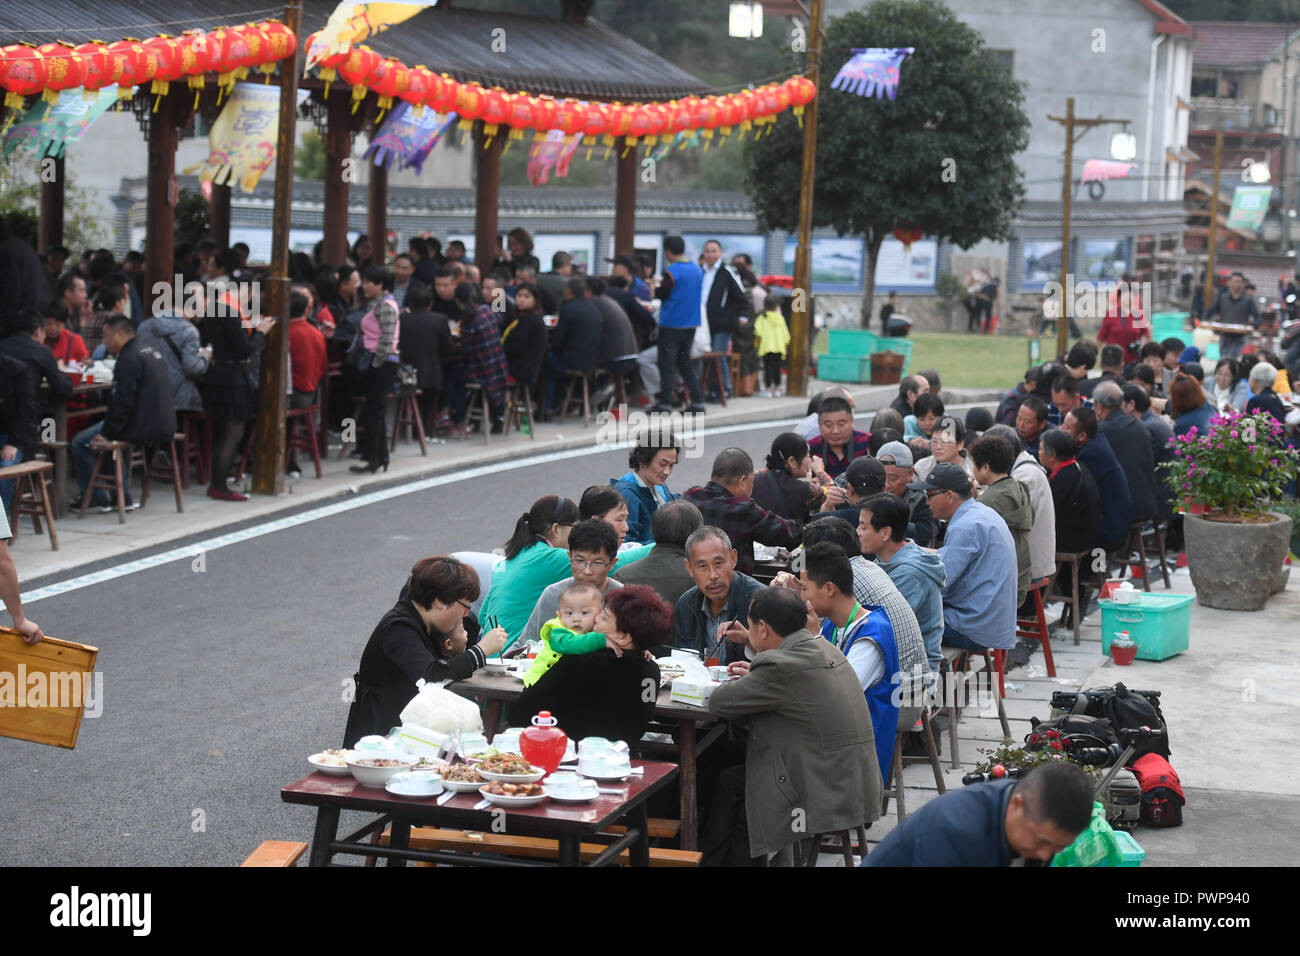 Tonglu, China's Zhejiang Province. 17th Oct, 2018. Local residents and tourists enjoy the long-table banquet held at Longfeng Ethnic Village in Eshan Township of the She ethnic group of Tonglu County, east China's Zhejiang Province, Oct. 17, 2018. A total of 100 tables of delicacies were presented at the long-table banquet along a street held at the village, attracting local residents as well as tourists to enjoy the food of the She ethnic group. Credit: Huang Zongzhi/Xinhua/Alamy Live News Stock Photo